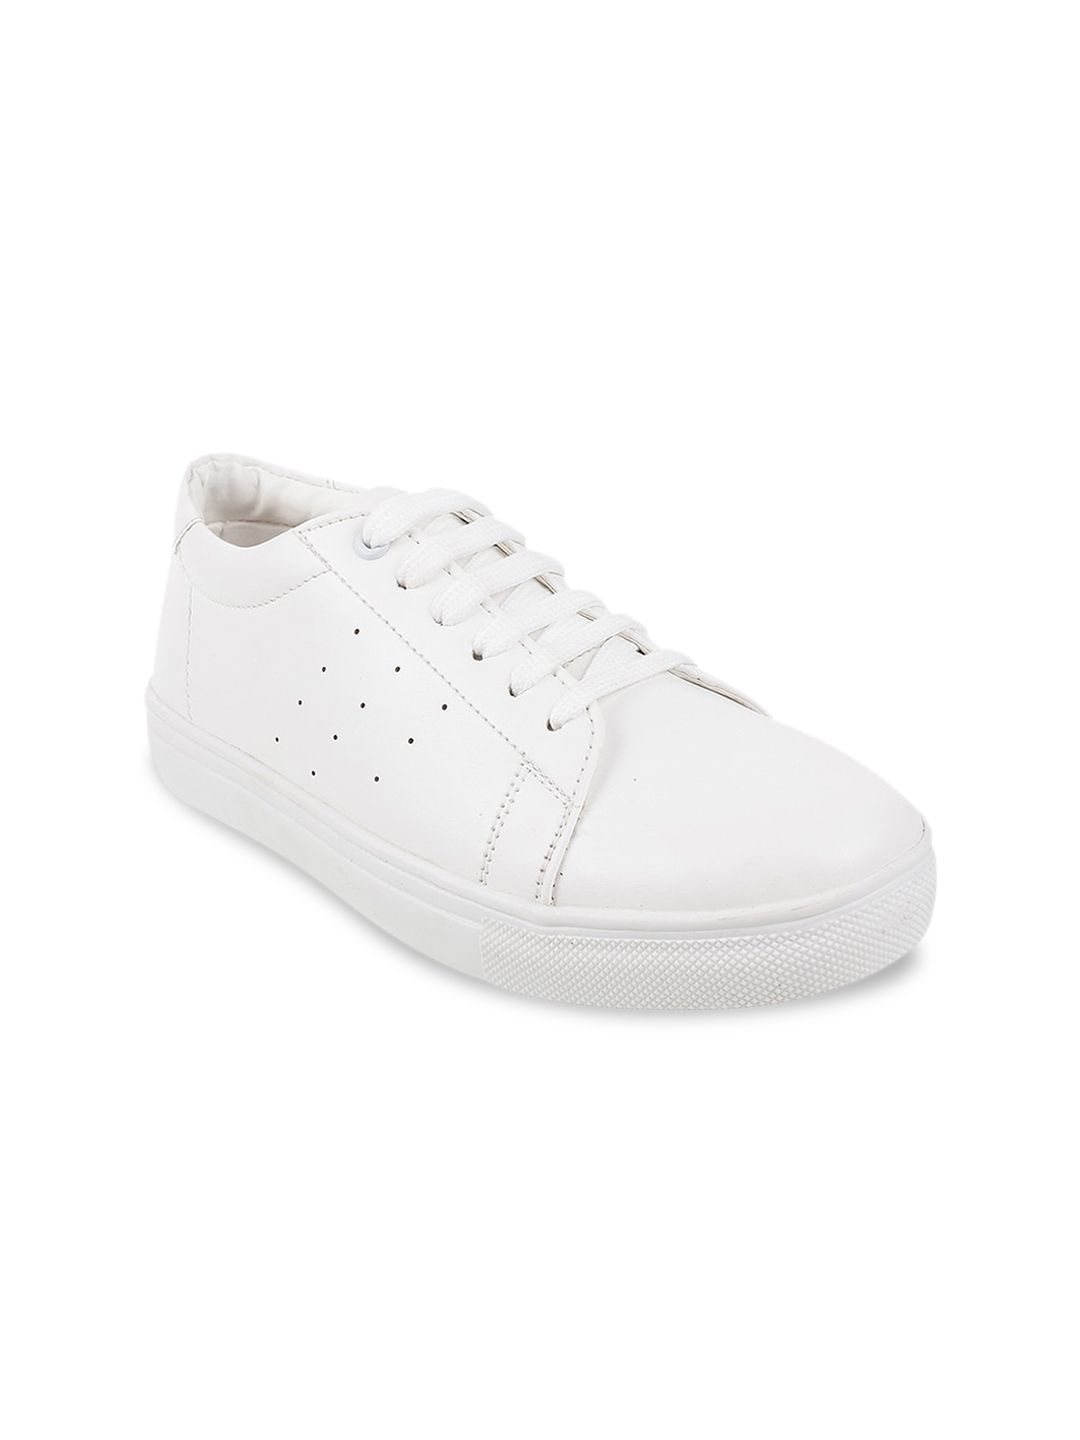 WALKWAY by Metro Women White Perforations Sneakers Price in India